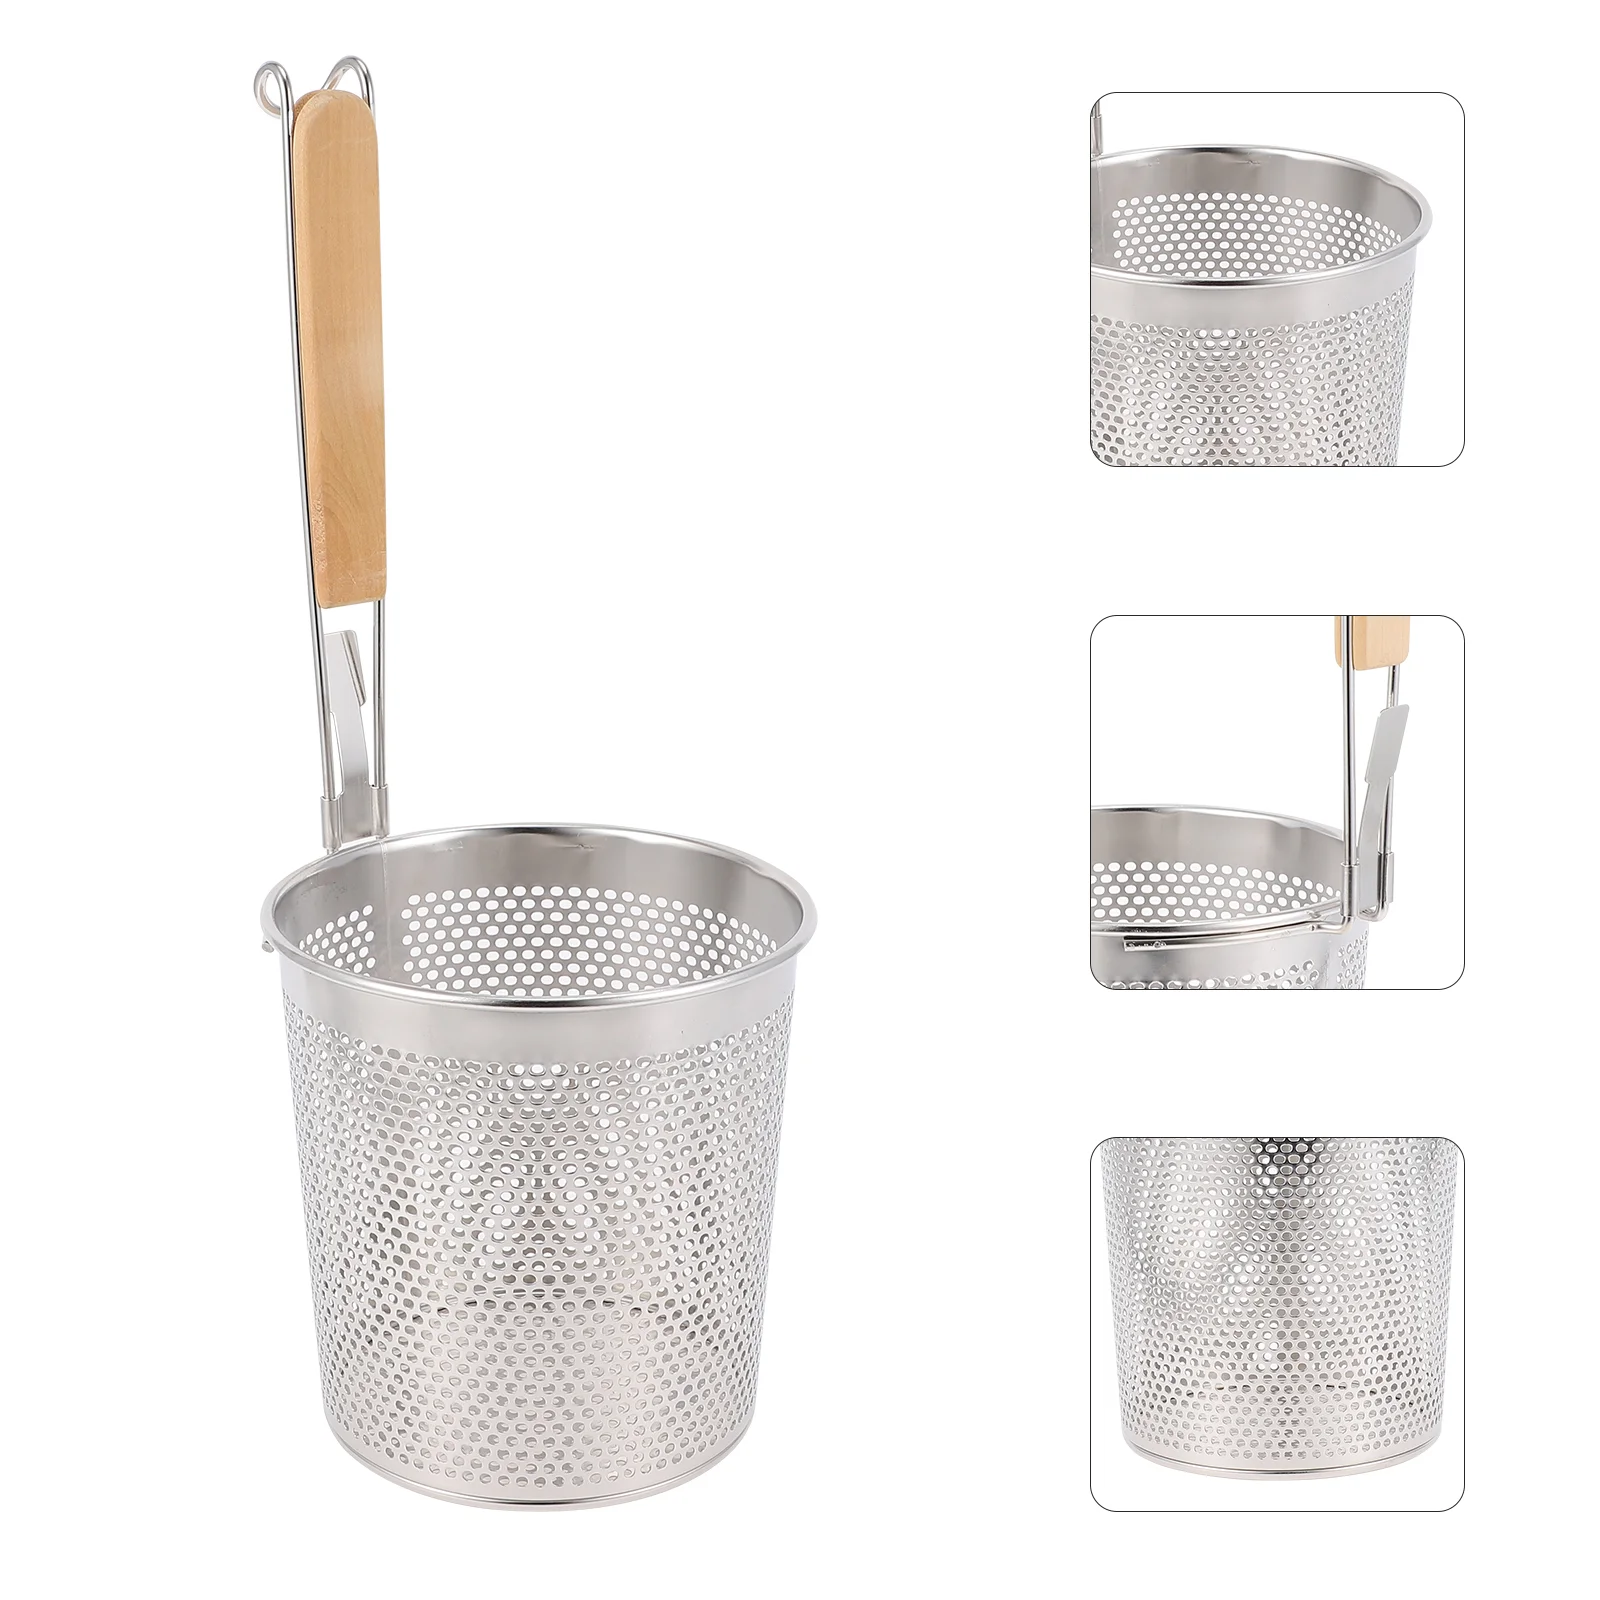 

Powder Fence Frying Oil Strainer Noodle Straining Baskets Kitchen Sifter Slotted Scoop Stainless Steel Sieve